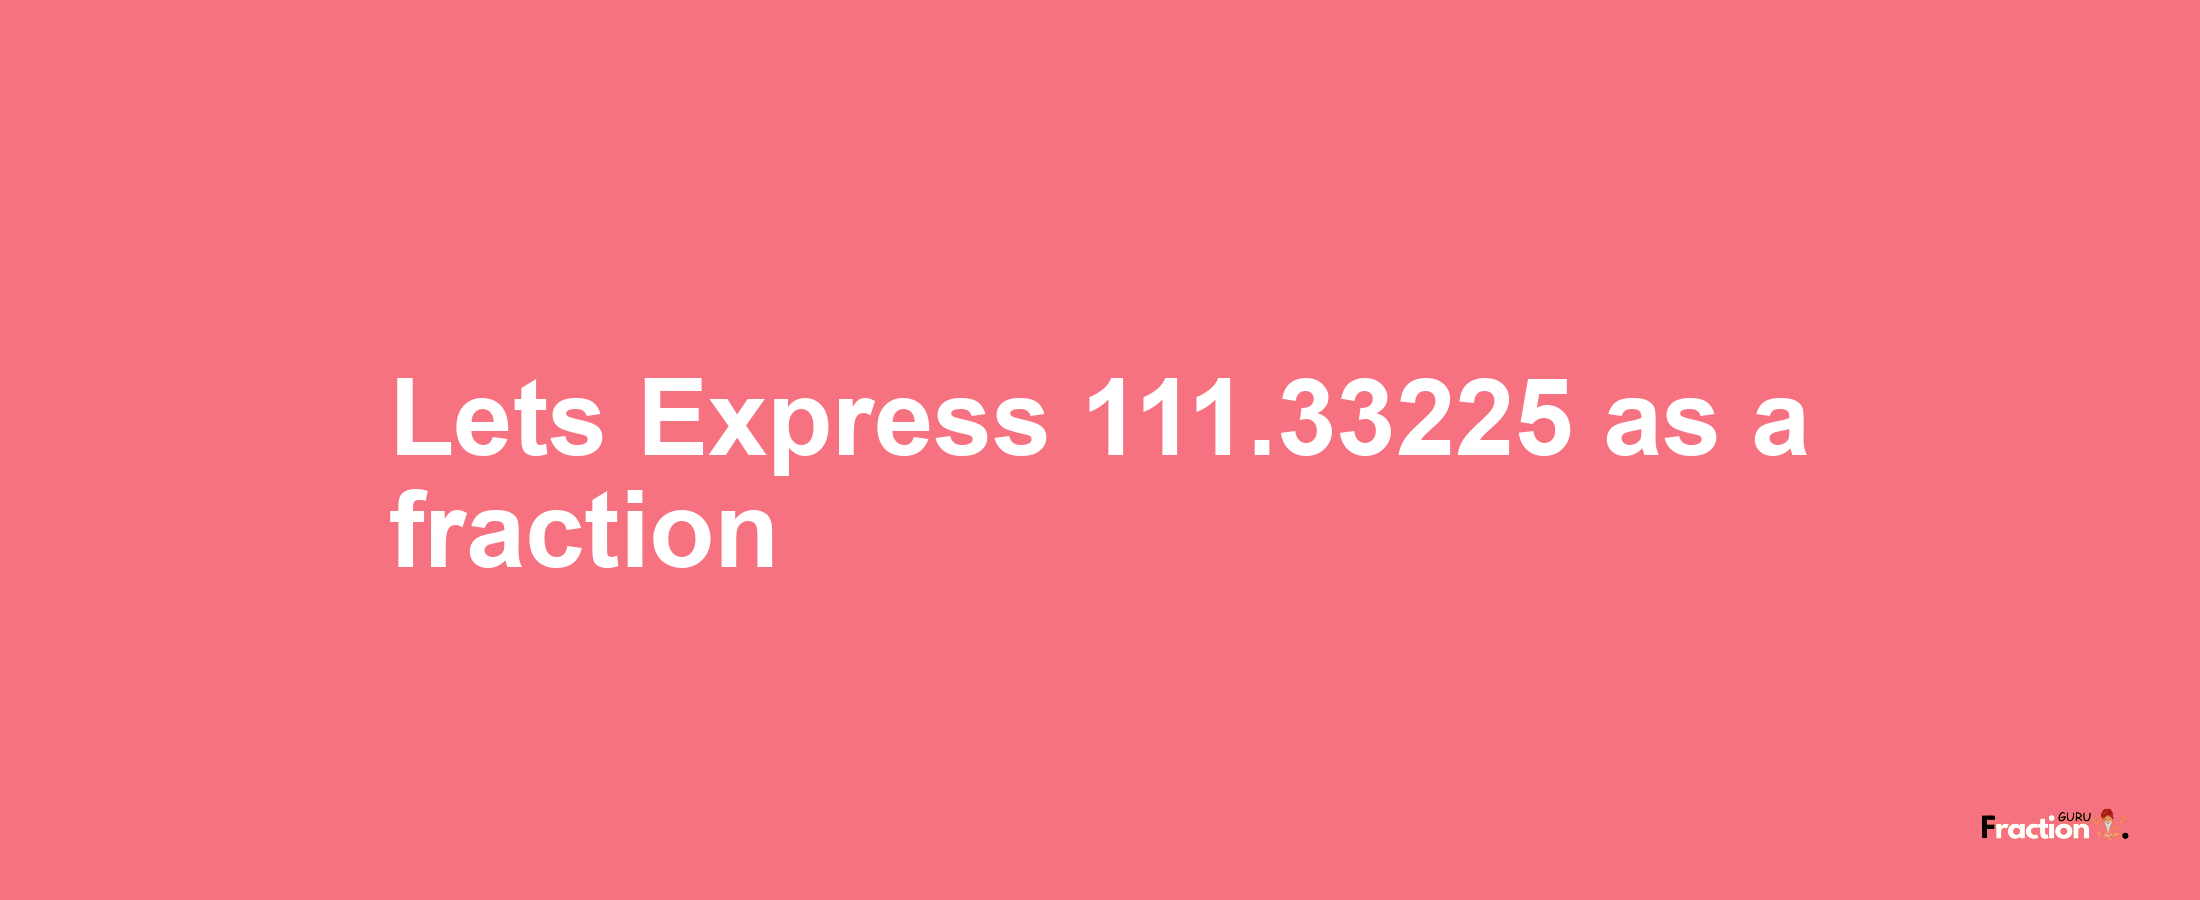 Lets Express 111.33225 as afraction